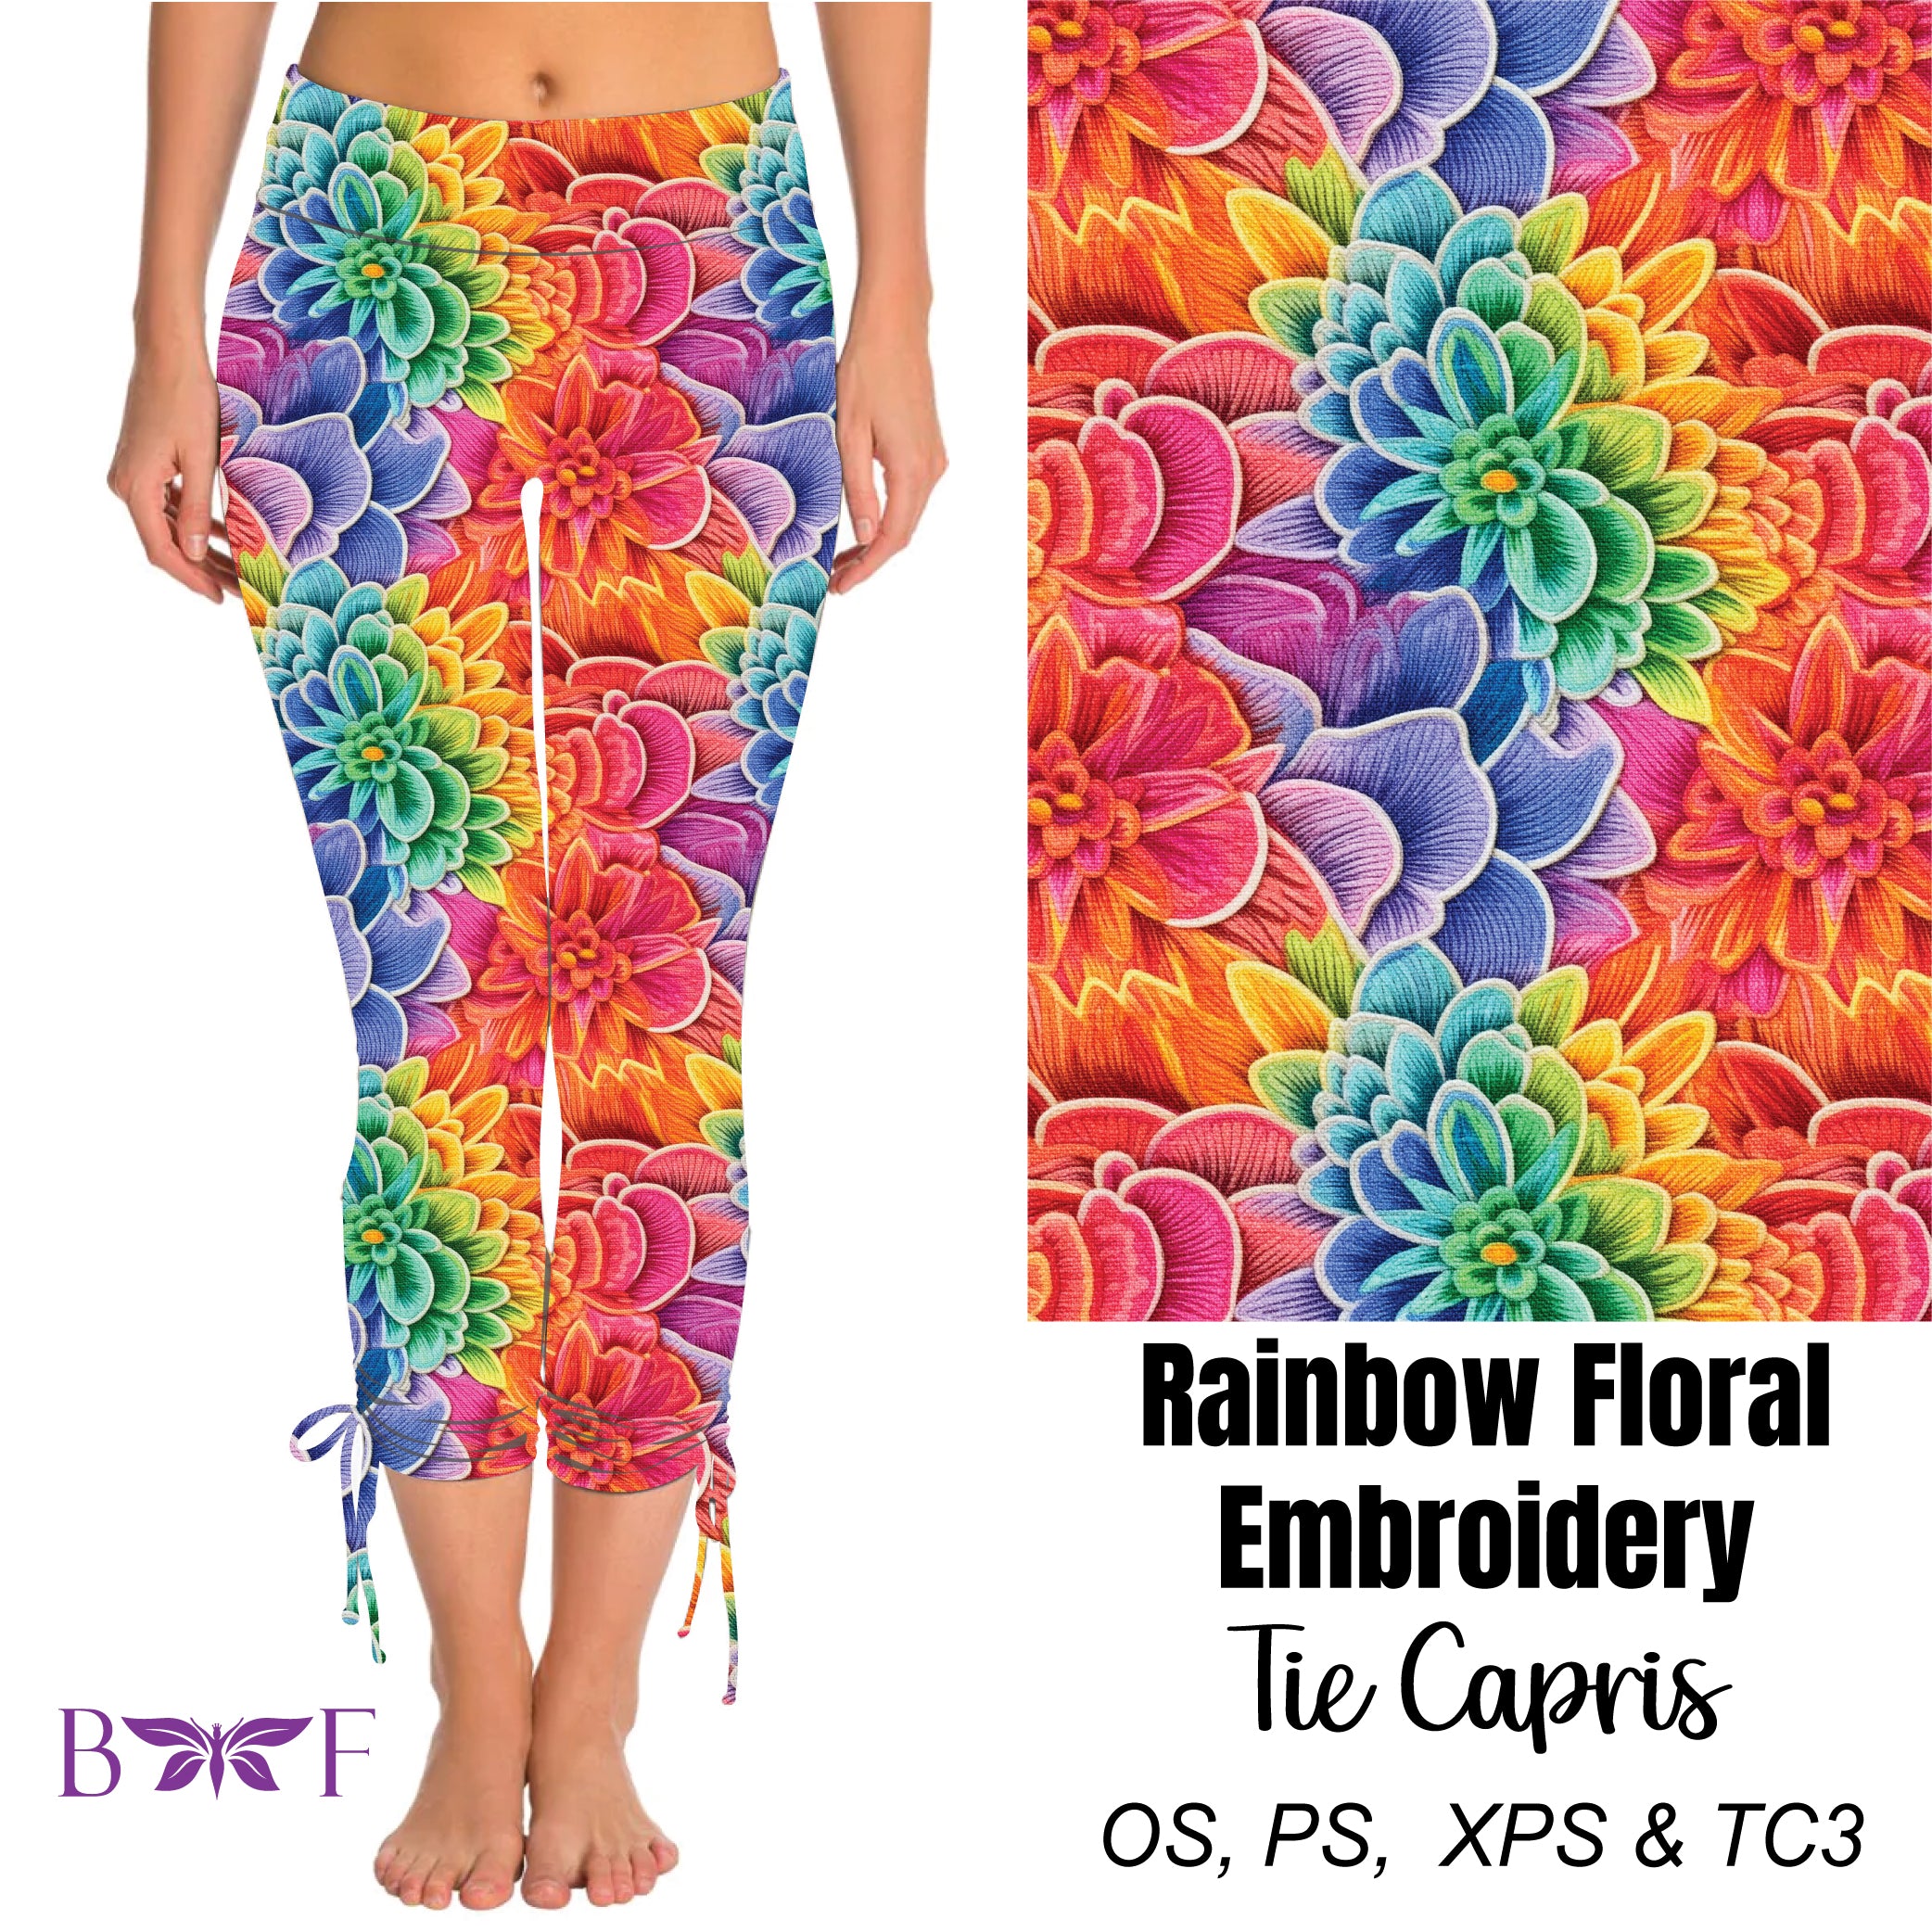 Rainbow Floral Embroidery Side Tie Capris and Biker Shorts